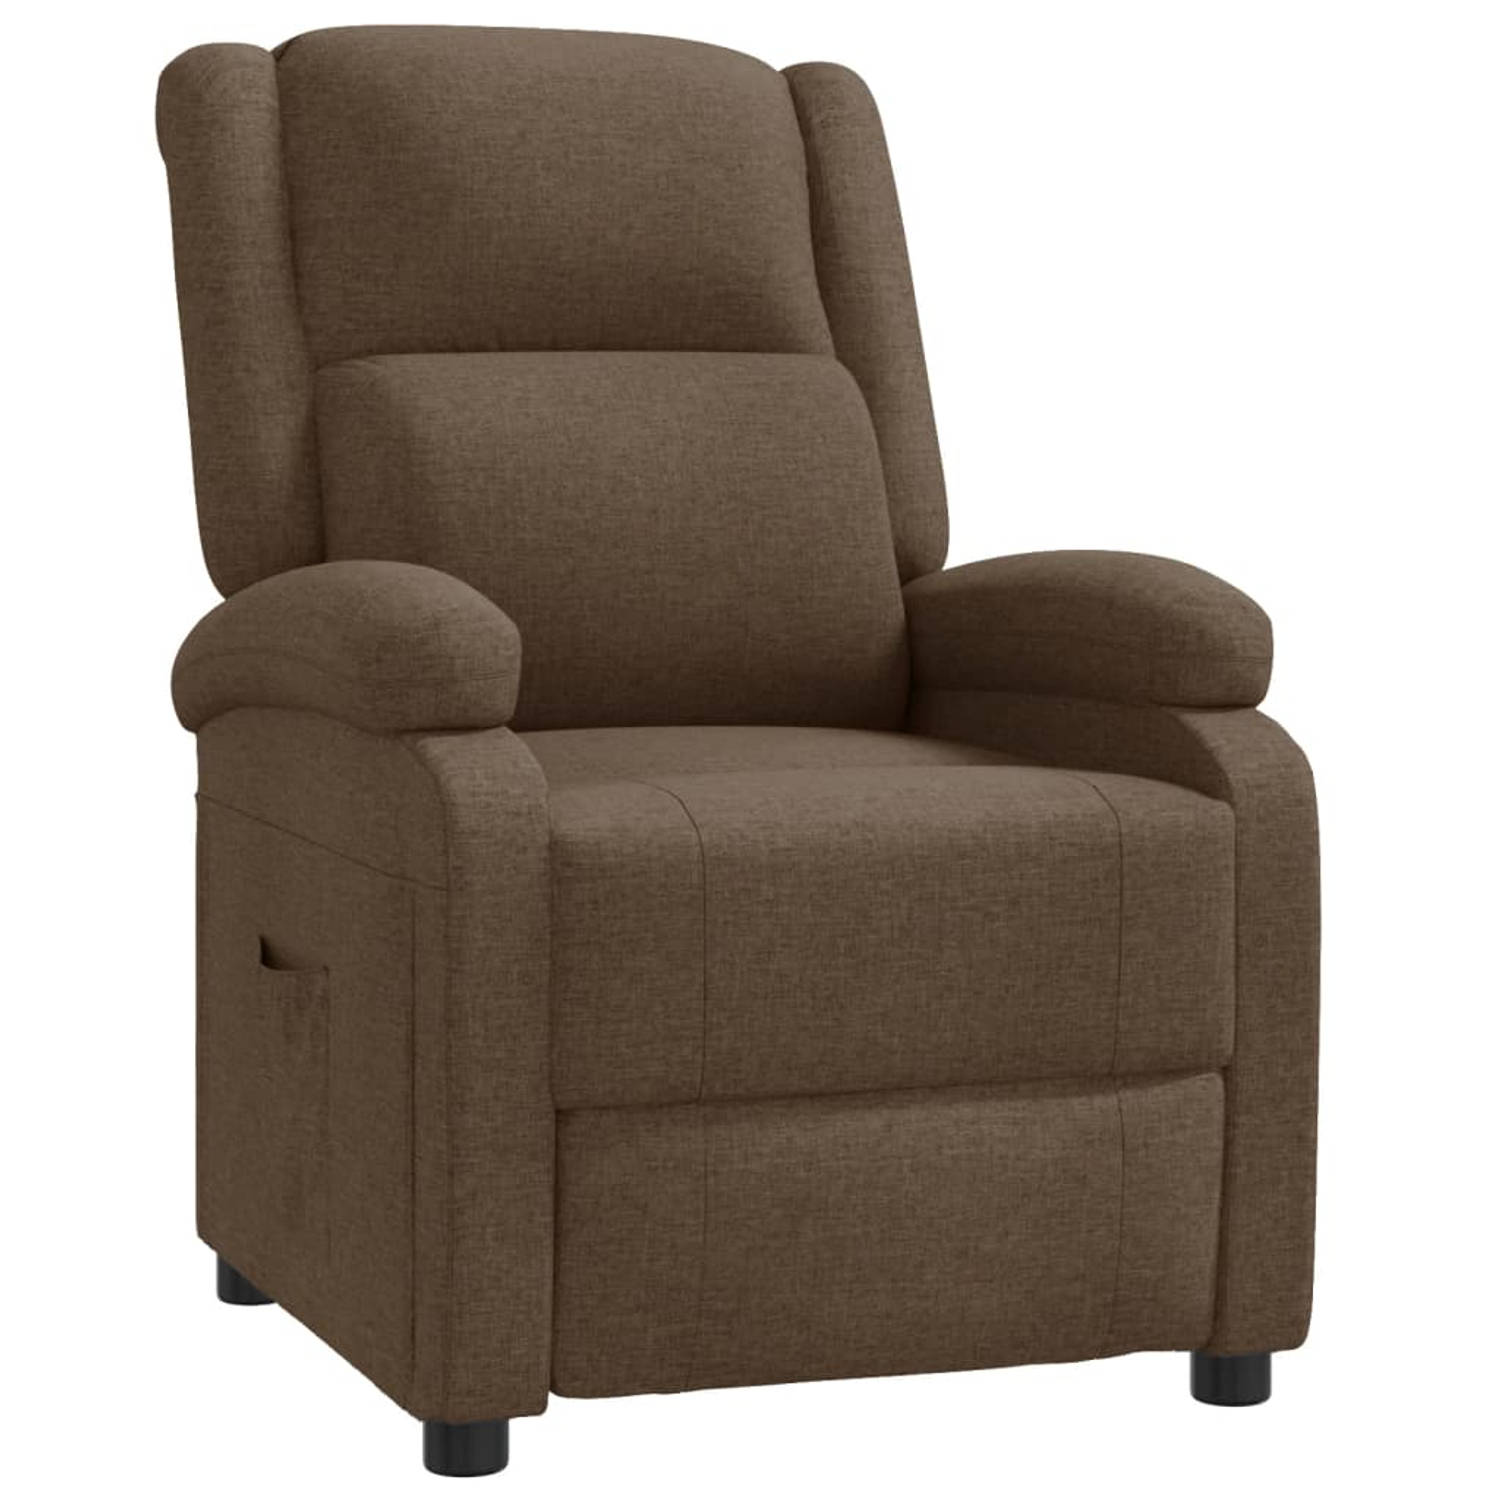 The Living Store Televisiefauteuil stof bruin - Fauteuil